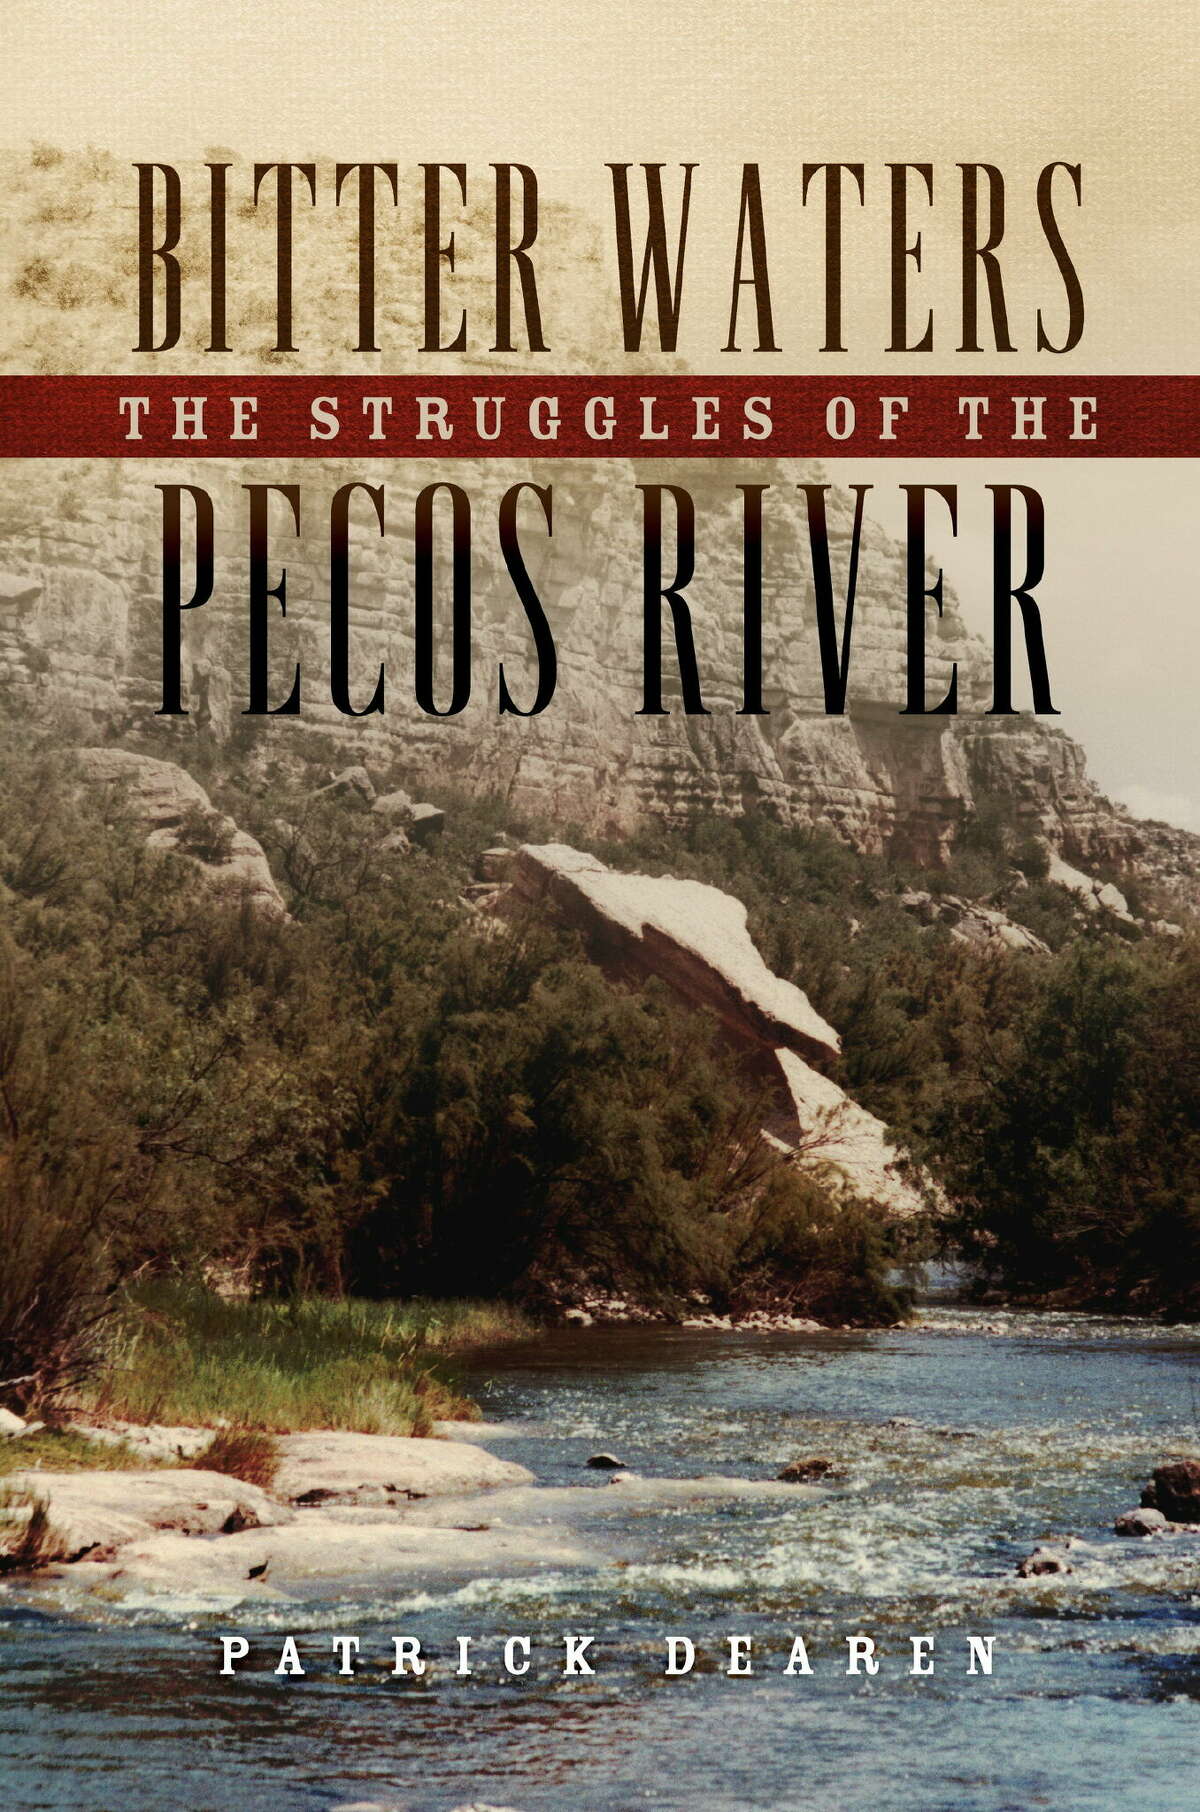 "Bitter Waters: The Struggles of the Pecos River" by Patrick Dearen